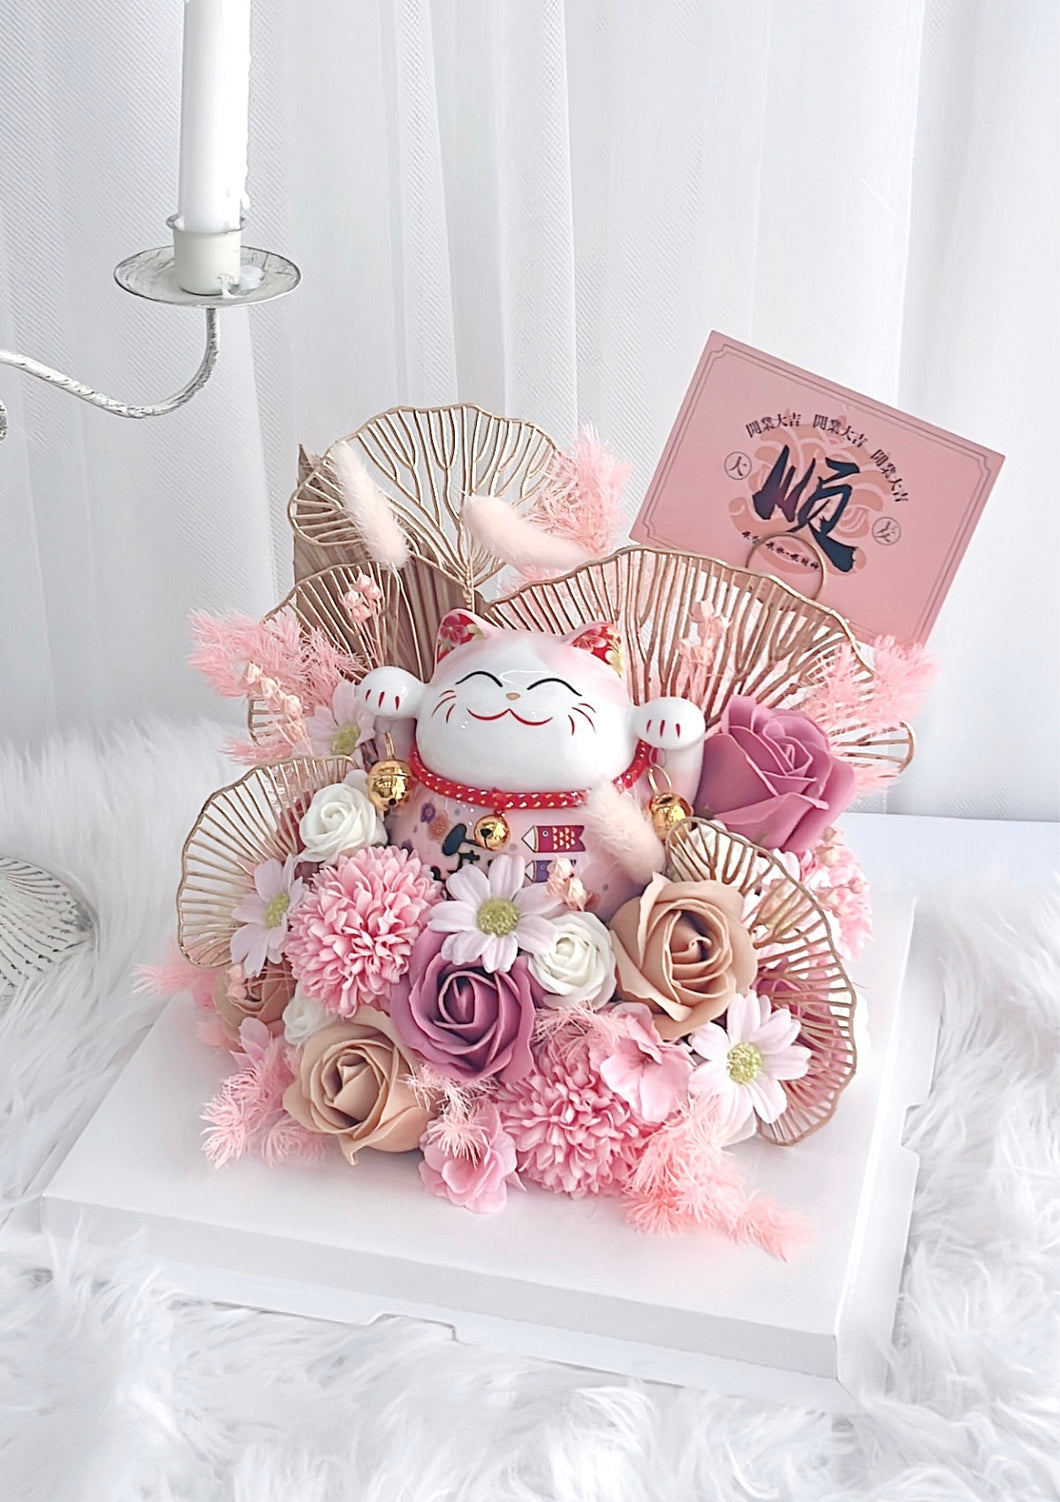 Pink Fortune Cat with Red Soap Flower Box 招财猫粉色系蛋糕香皂花礼盒